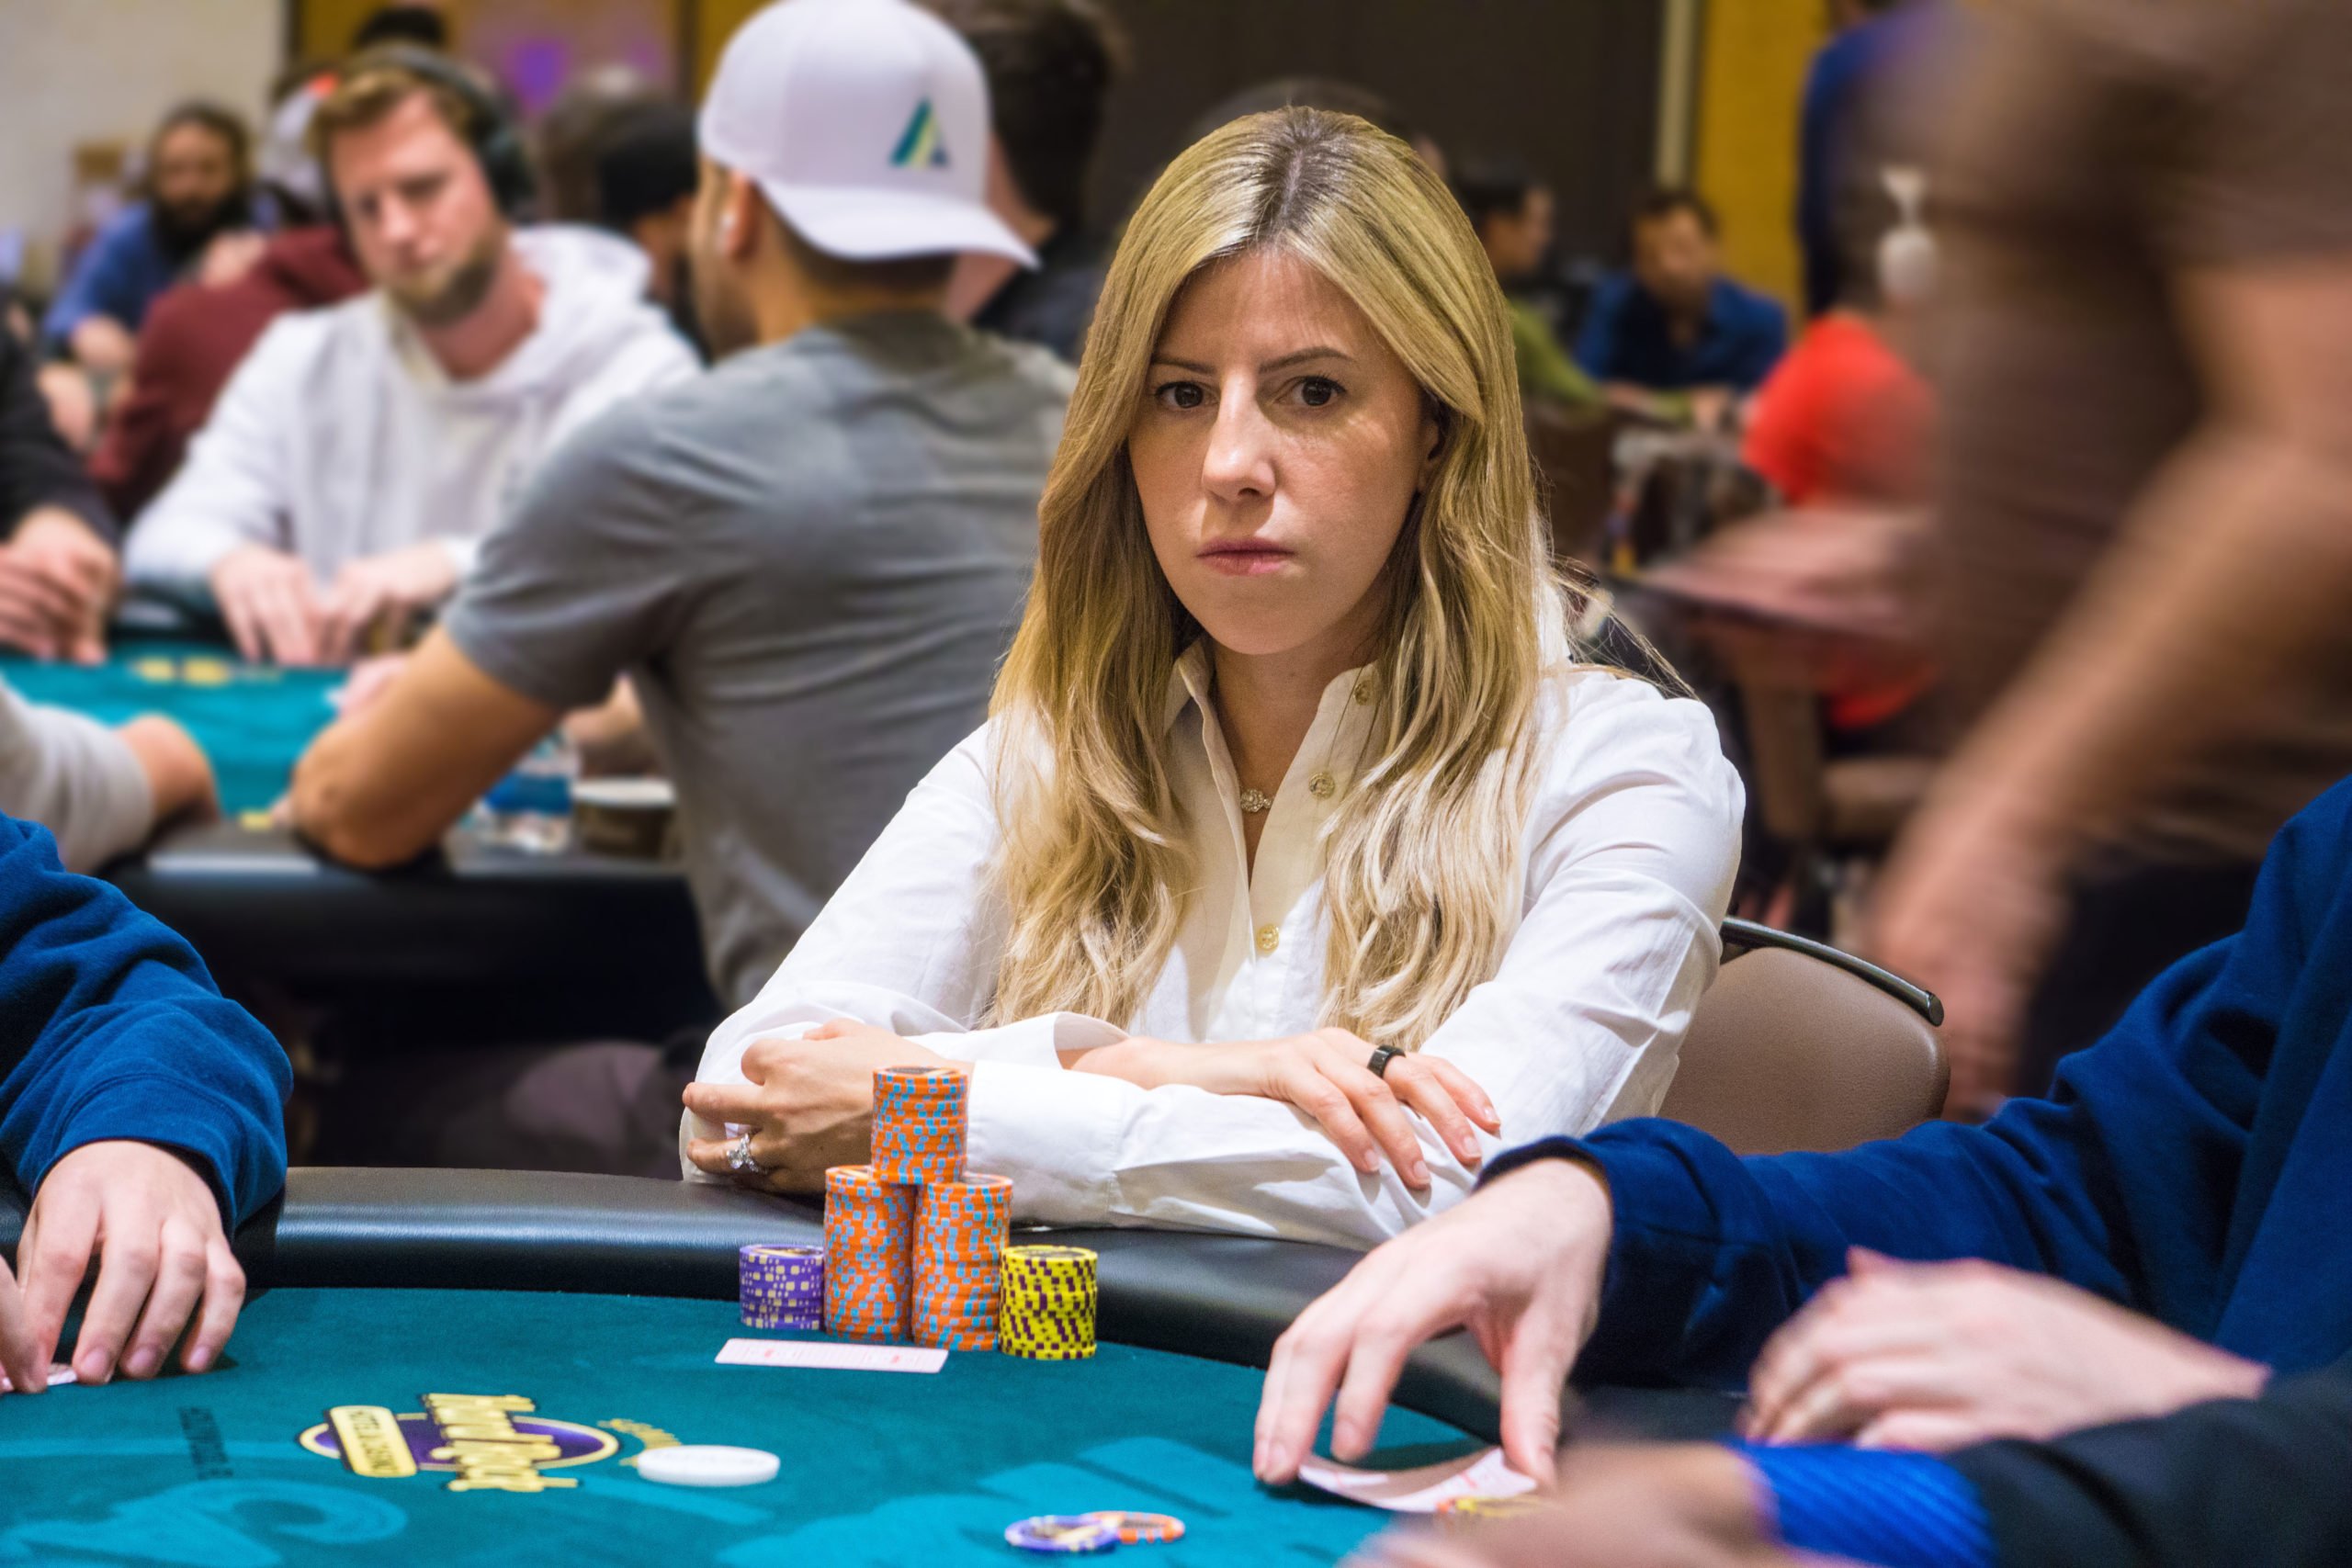 Kristen Foxen Wins Fourth Global Poker Index Player of the Year Award, Bin Weng and Nick Pupillo Join Her for First Time